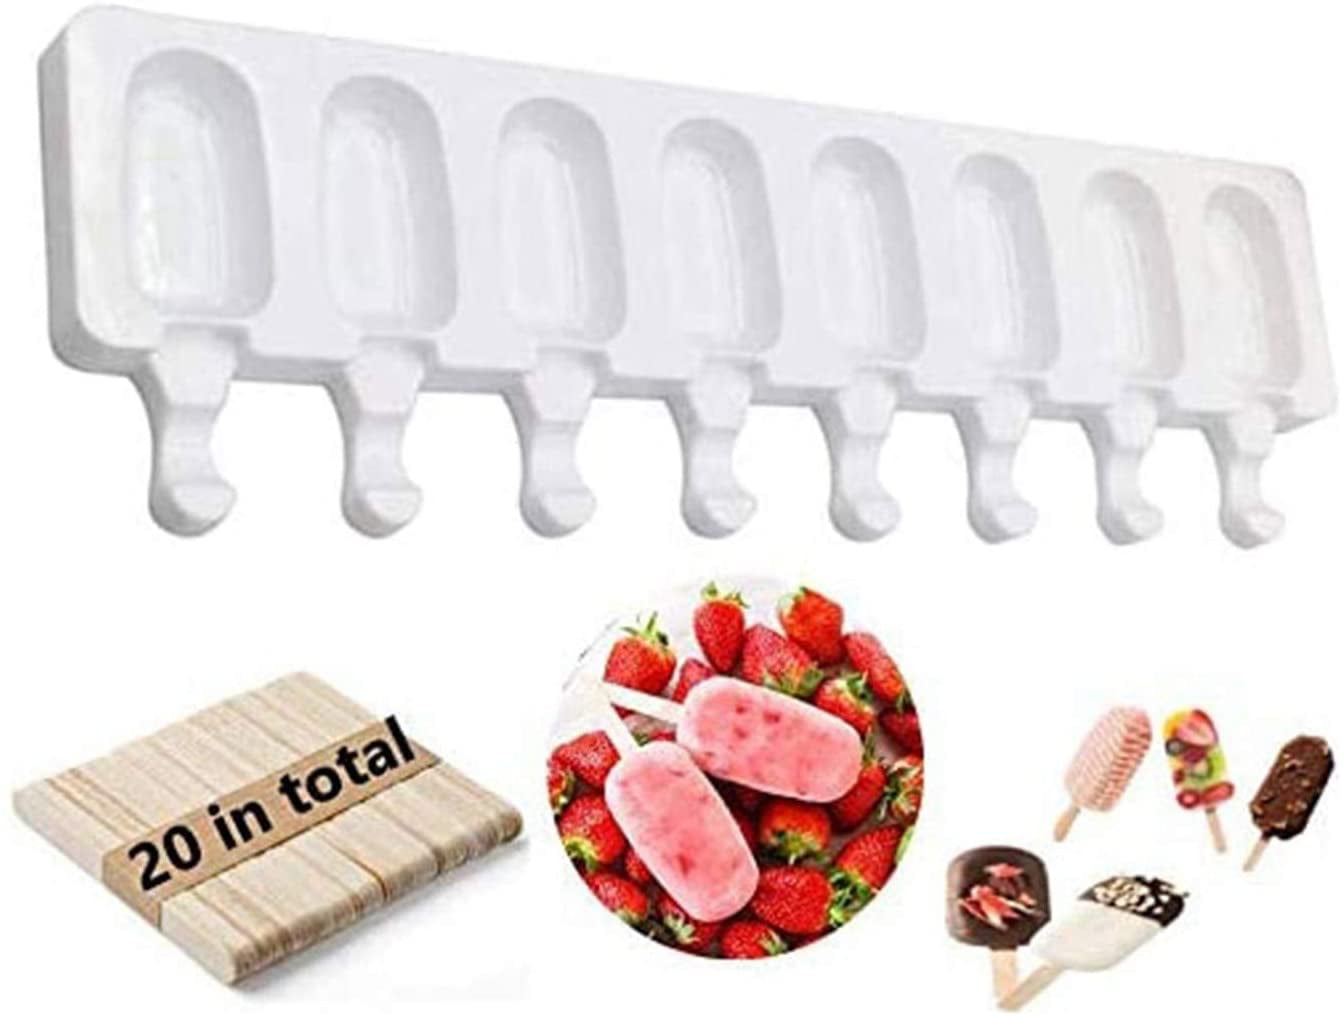 8Cell Silicone Ice Cream Mold Juice Popsicle Maker Ice Lolly Mould Wooden Stick 